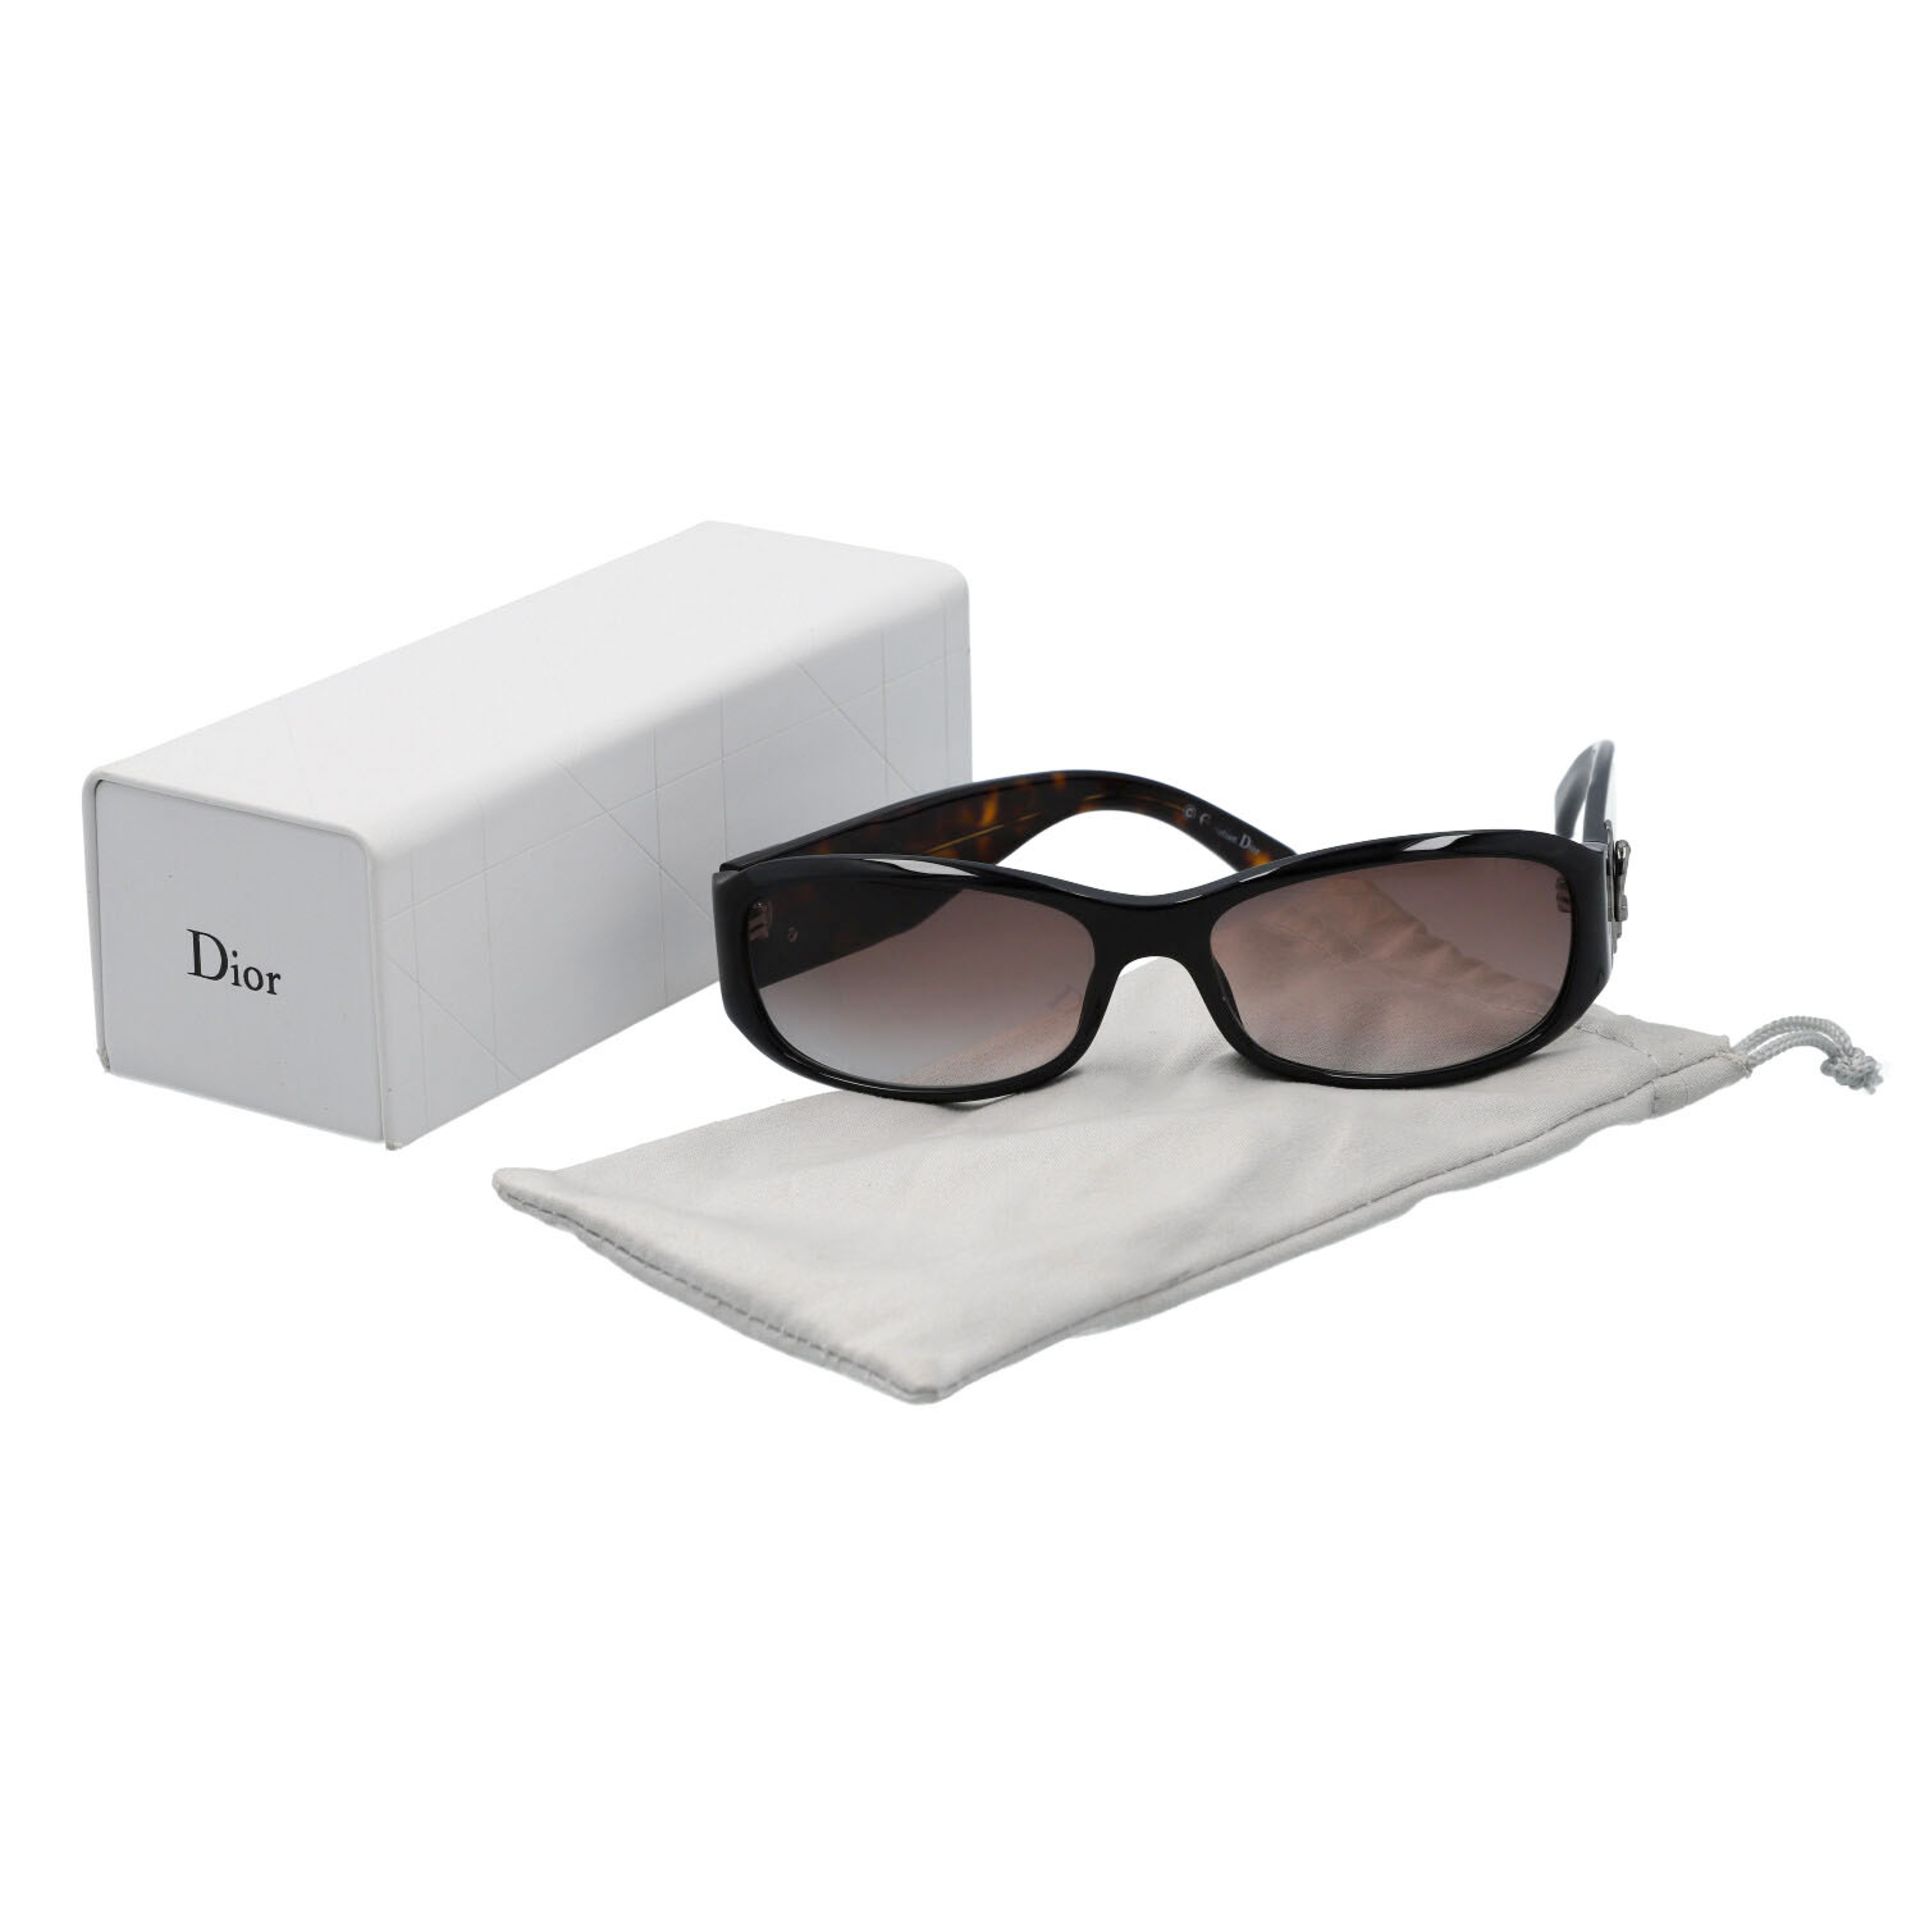 DIOR Sonnenbrille "MADE 2". - Image 6 of 6